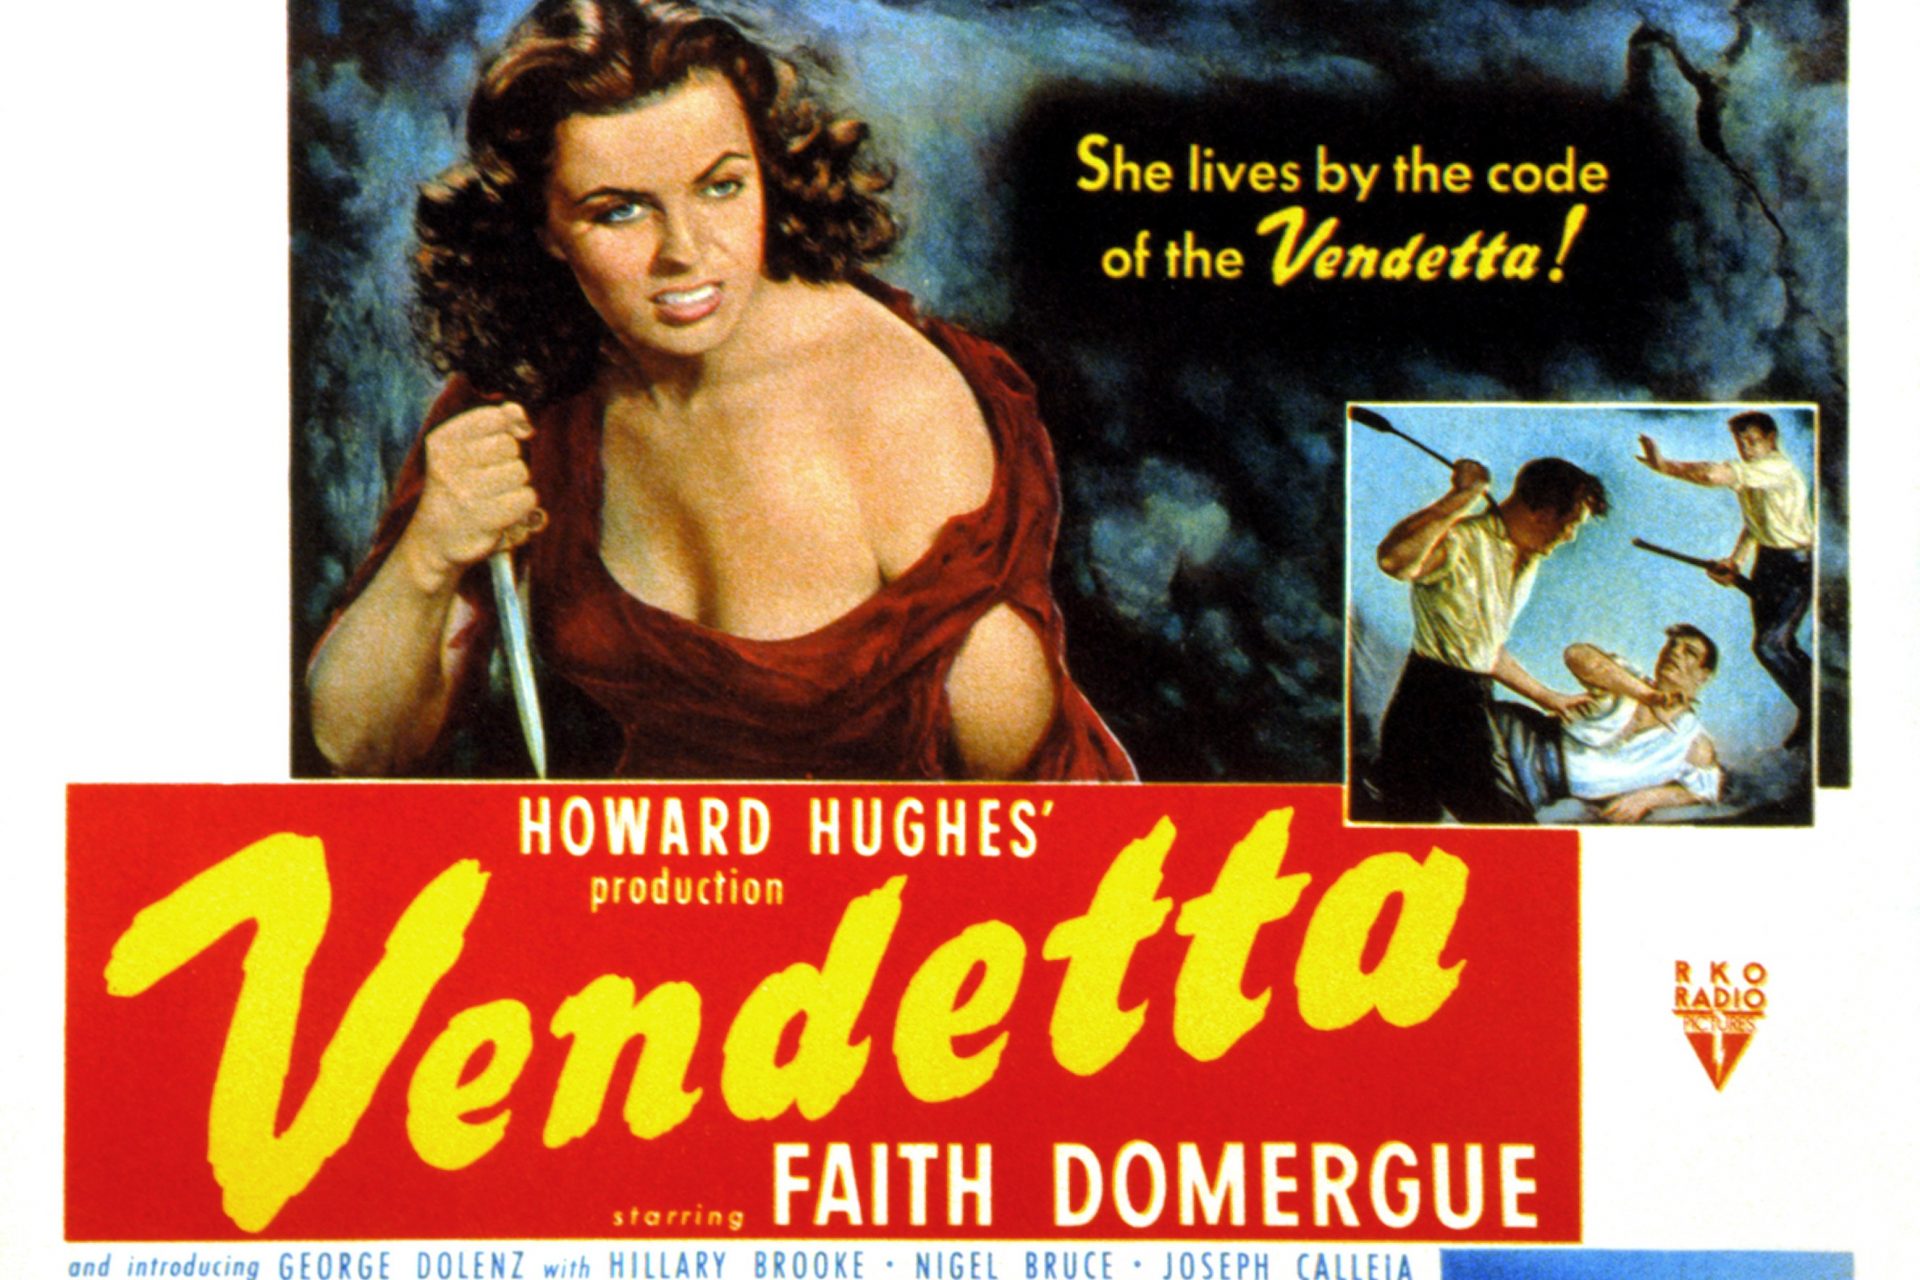 Faith Domergue: 'Little baby' and 'father lover' 